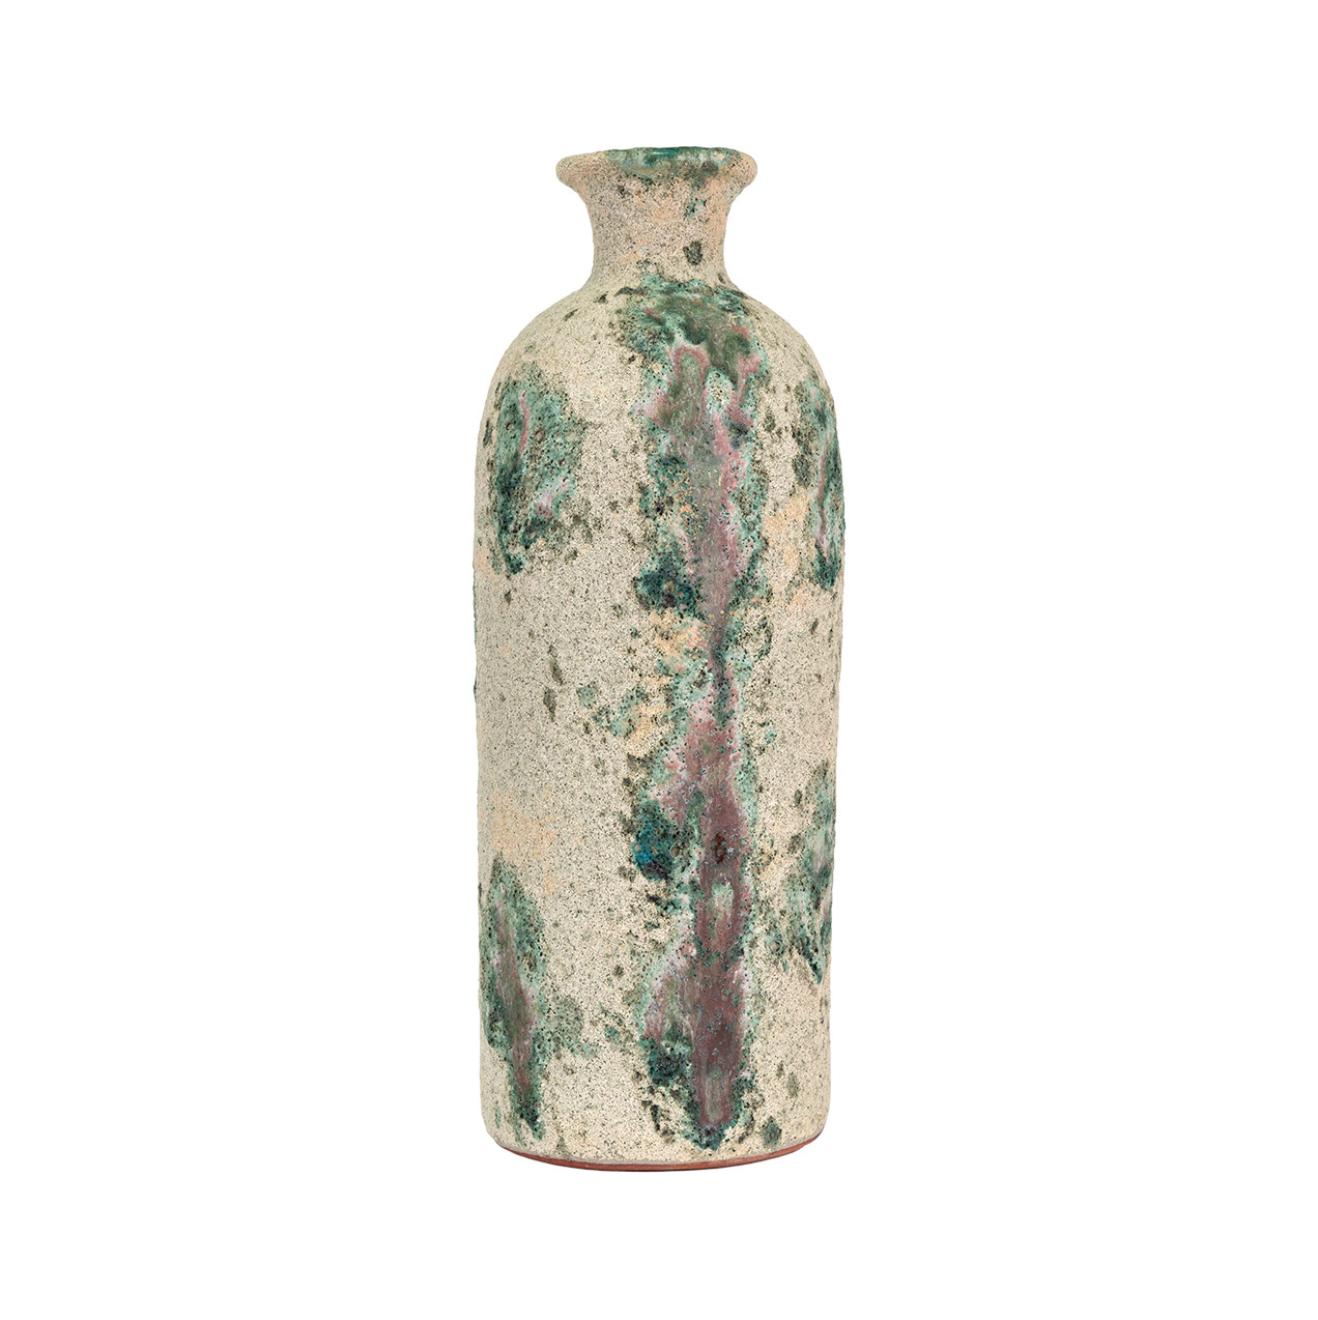 A tall ceramic Fallon vase from The Import Collection with a textured surface featuring earthy beige and patches of green and blue. The vase has a narrow neck and is reminiscent of Scottsdale Arizona, standing isolated against a white background.